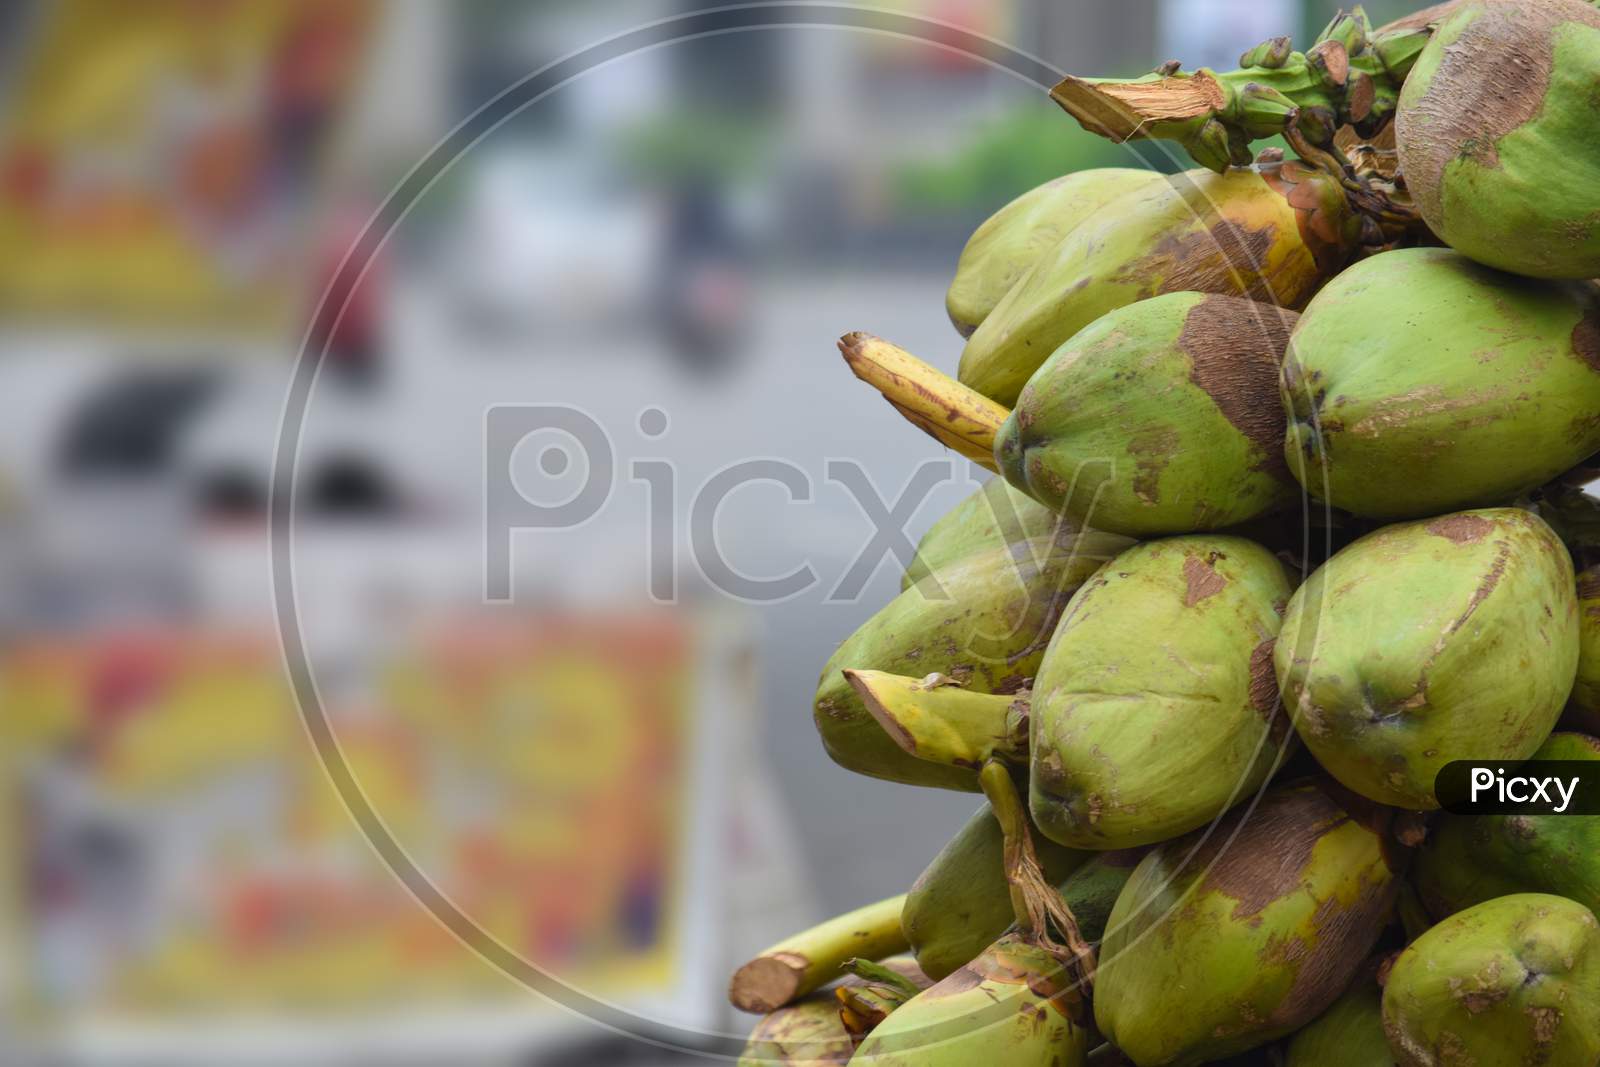 pile or bunch of coconuts on the cart at road for sells in india, hyderabad